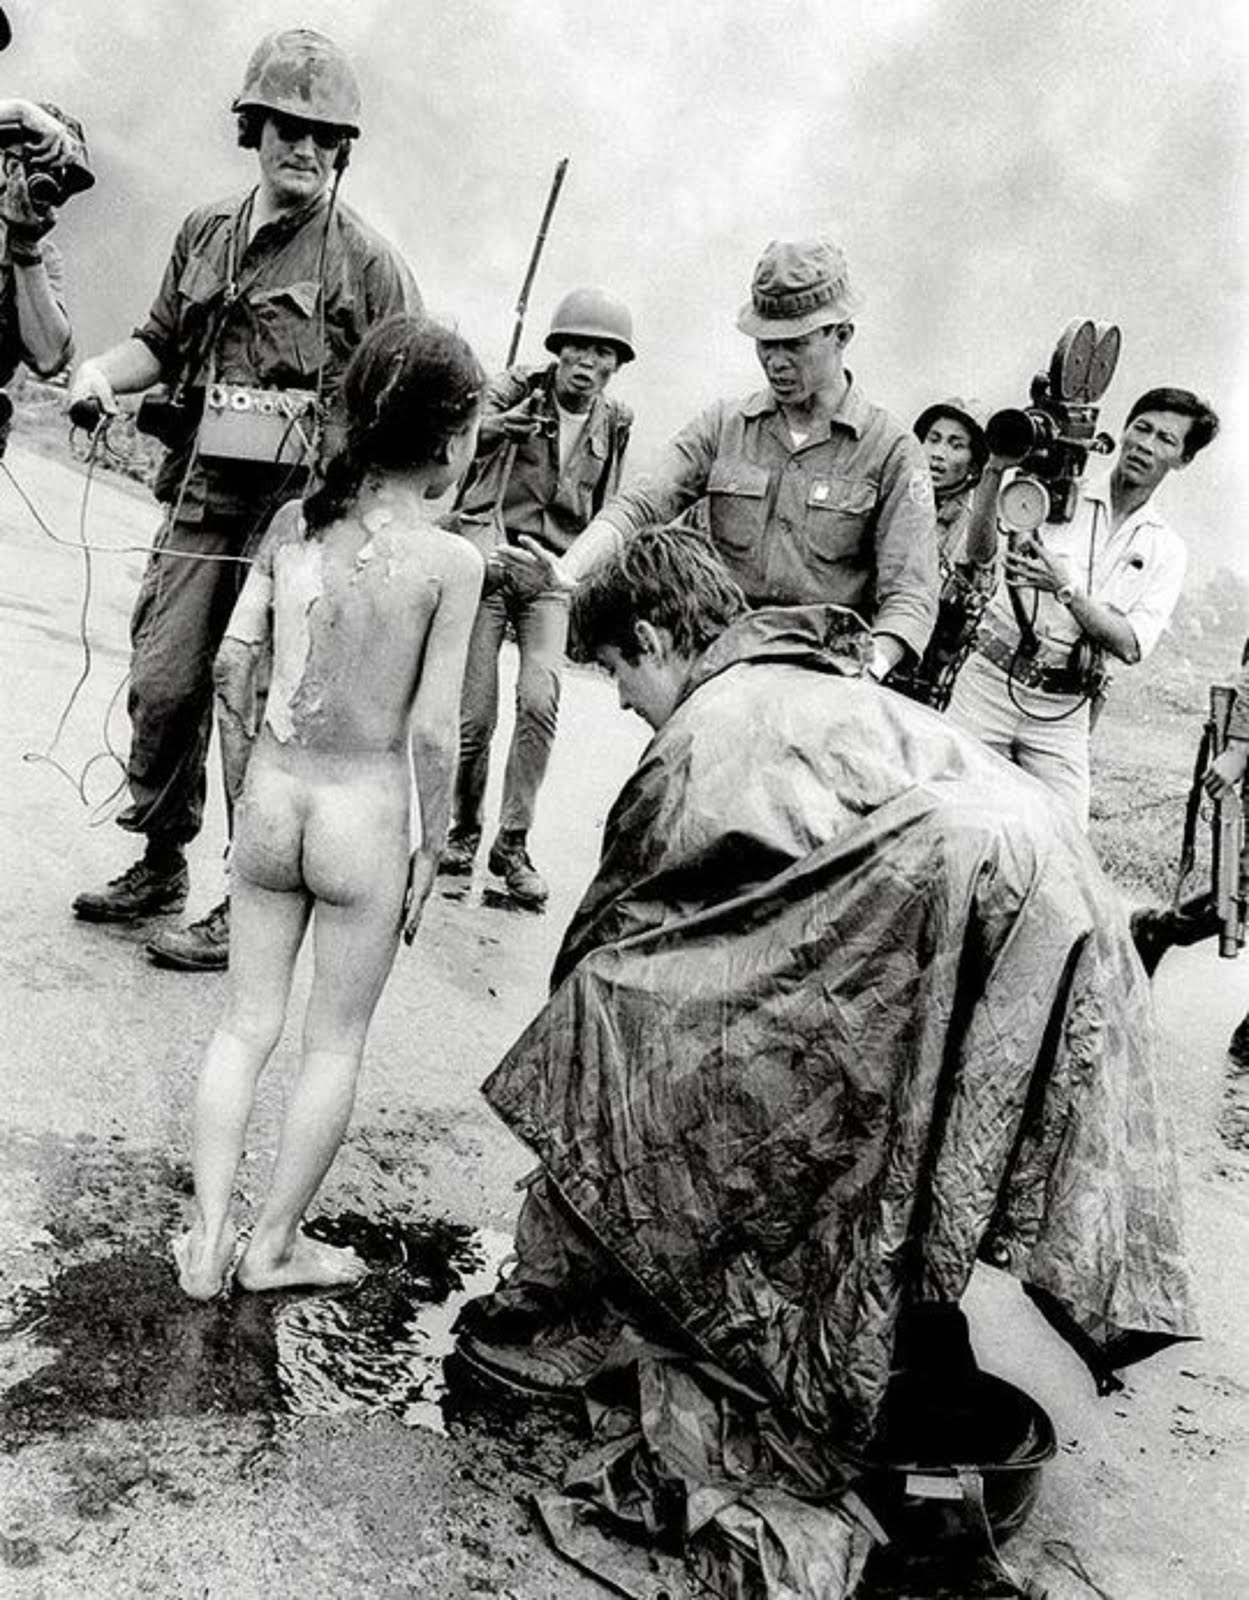 VIETNAM VETERANS GIVE FIRST AID TO THE LITTLE NAPALM GIRL